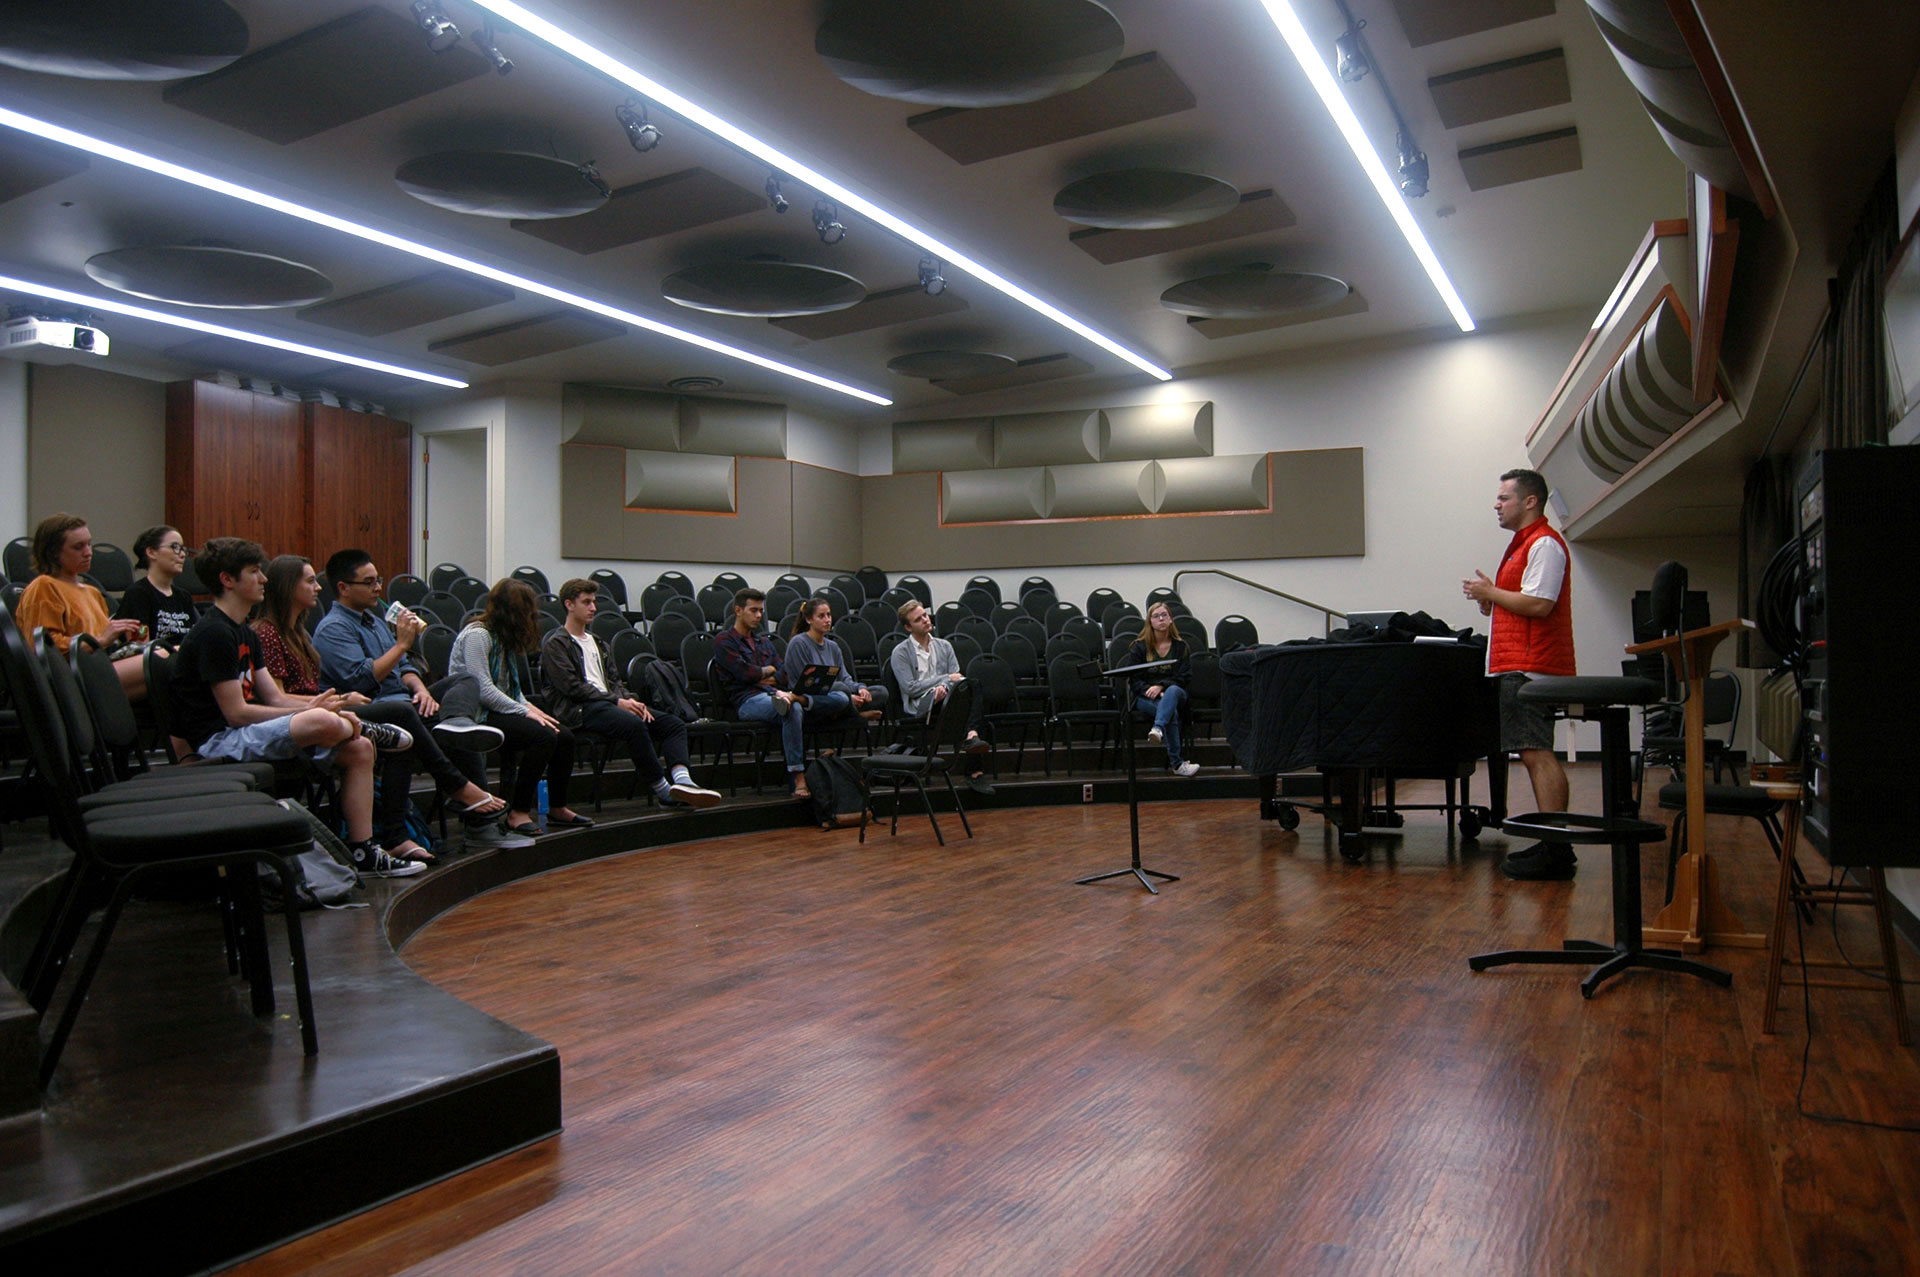 October 8, 2017 | San Luis Obispo, CA | Take It SLO, Cal Poly’s competitive a capella group,
begin their third meeting of the quarter in room 218, building 45. Group president and art and
design senior Blake Silva (right) addresses his band members: “We have to start preparing for
our winter show, guys. We already have requests for gigs coming in.” The group just recently
concluded their auditions for new members on the 24th of September.